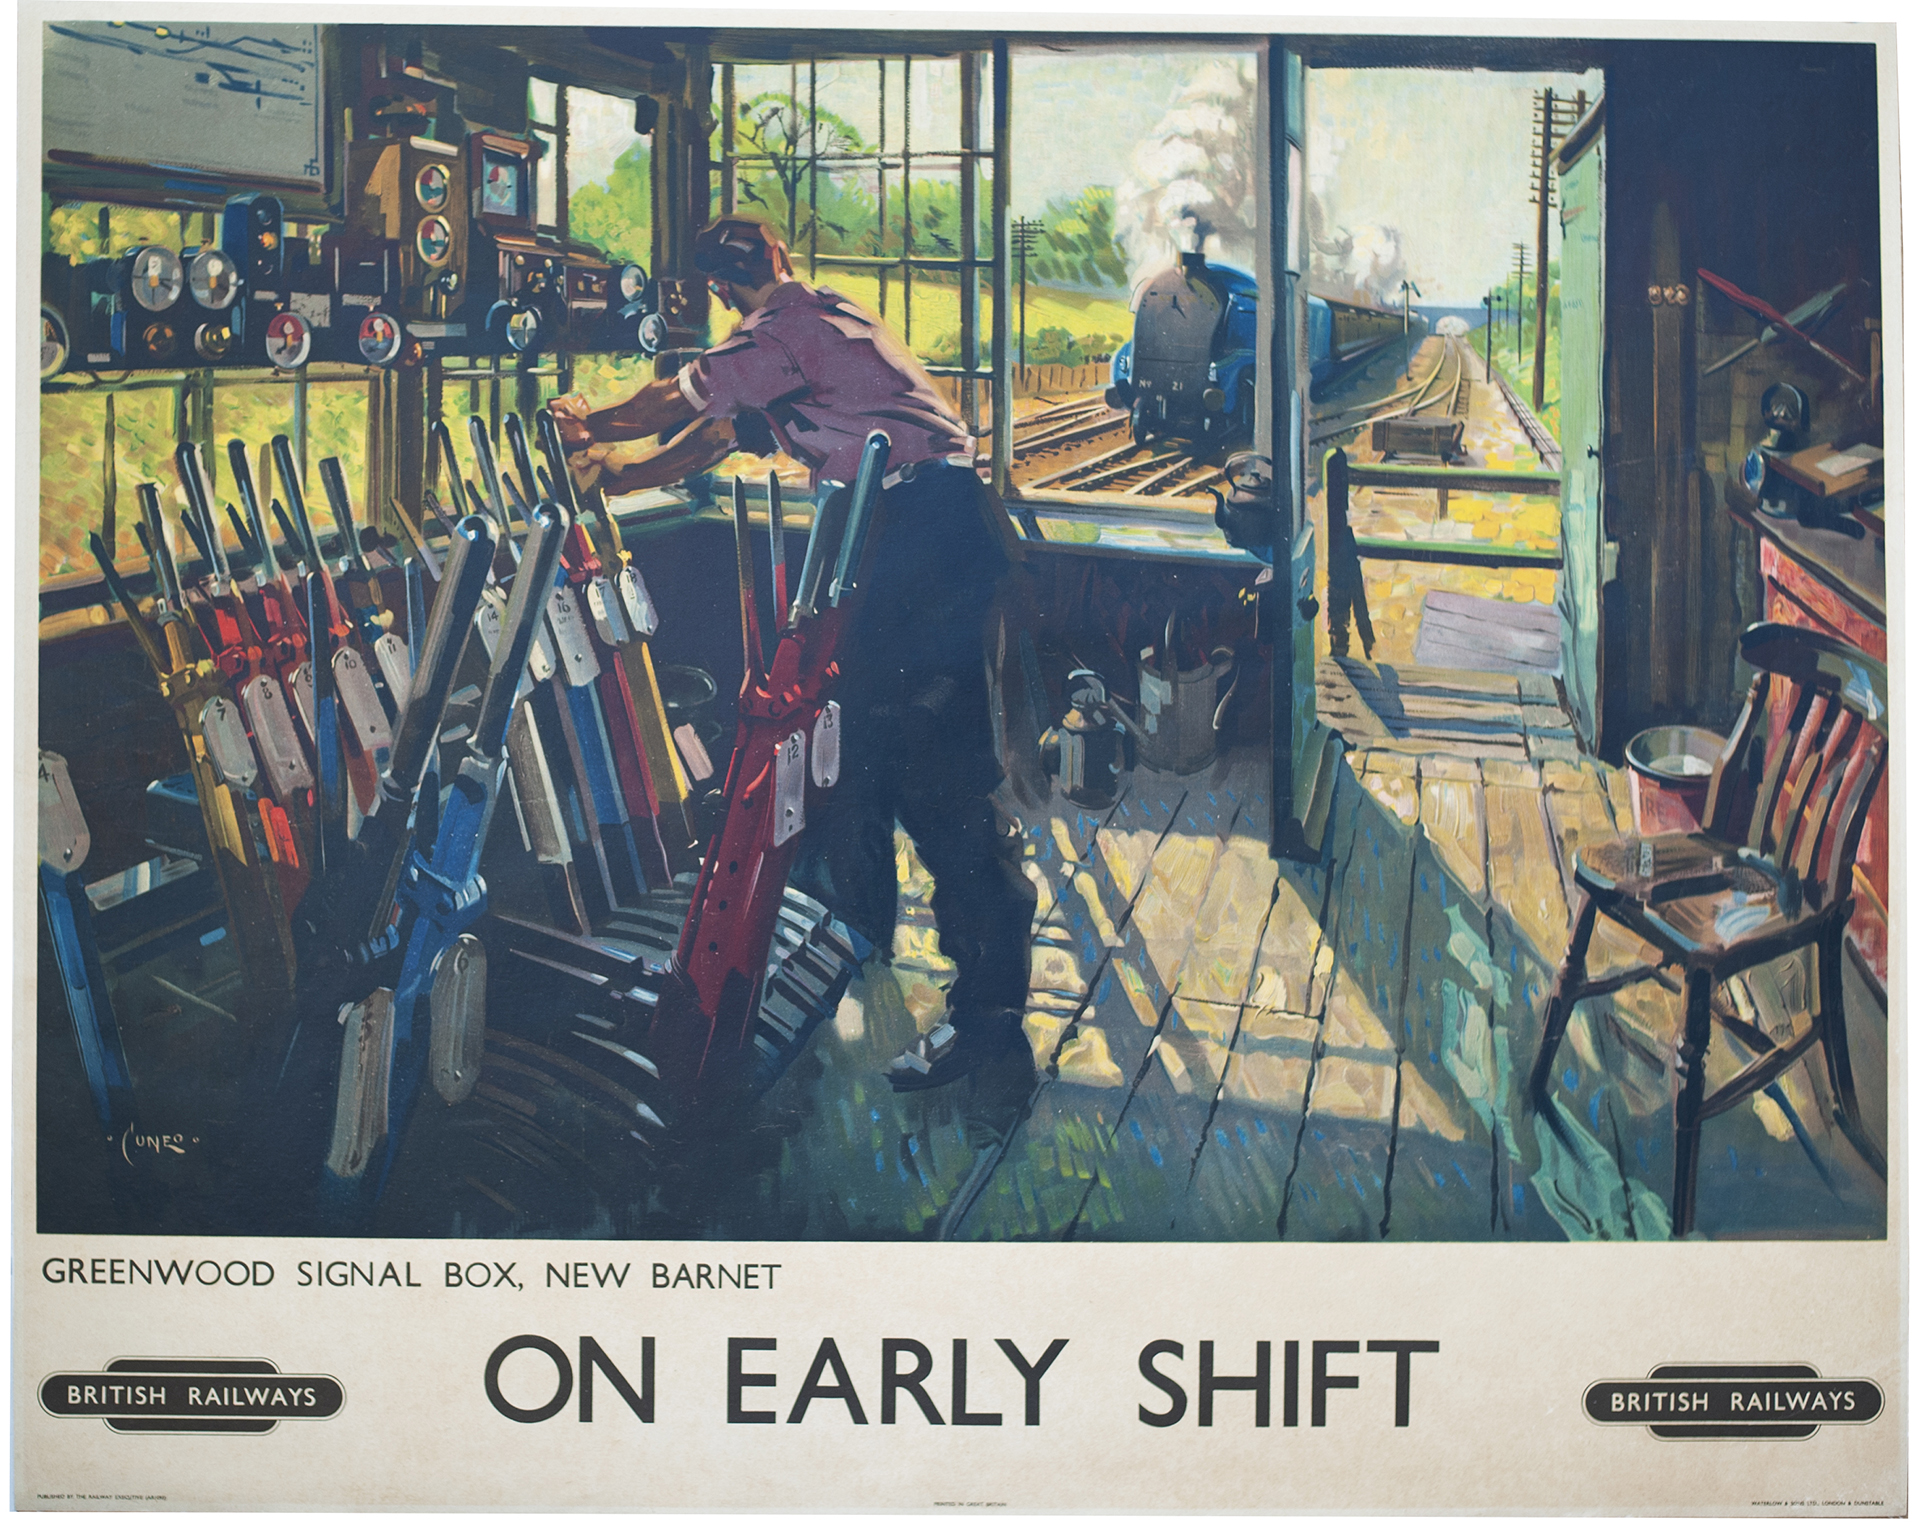 Poster BR ON EARLY SHIFT GREENWOOD SIGNAL BOX NEW BARNET by Terence Cuneo. The poster has been